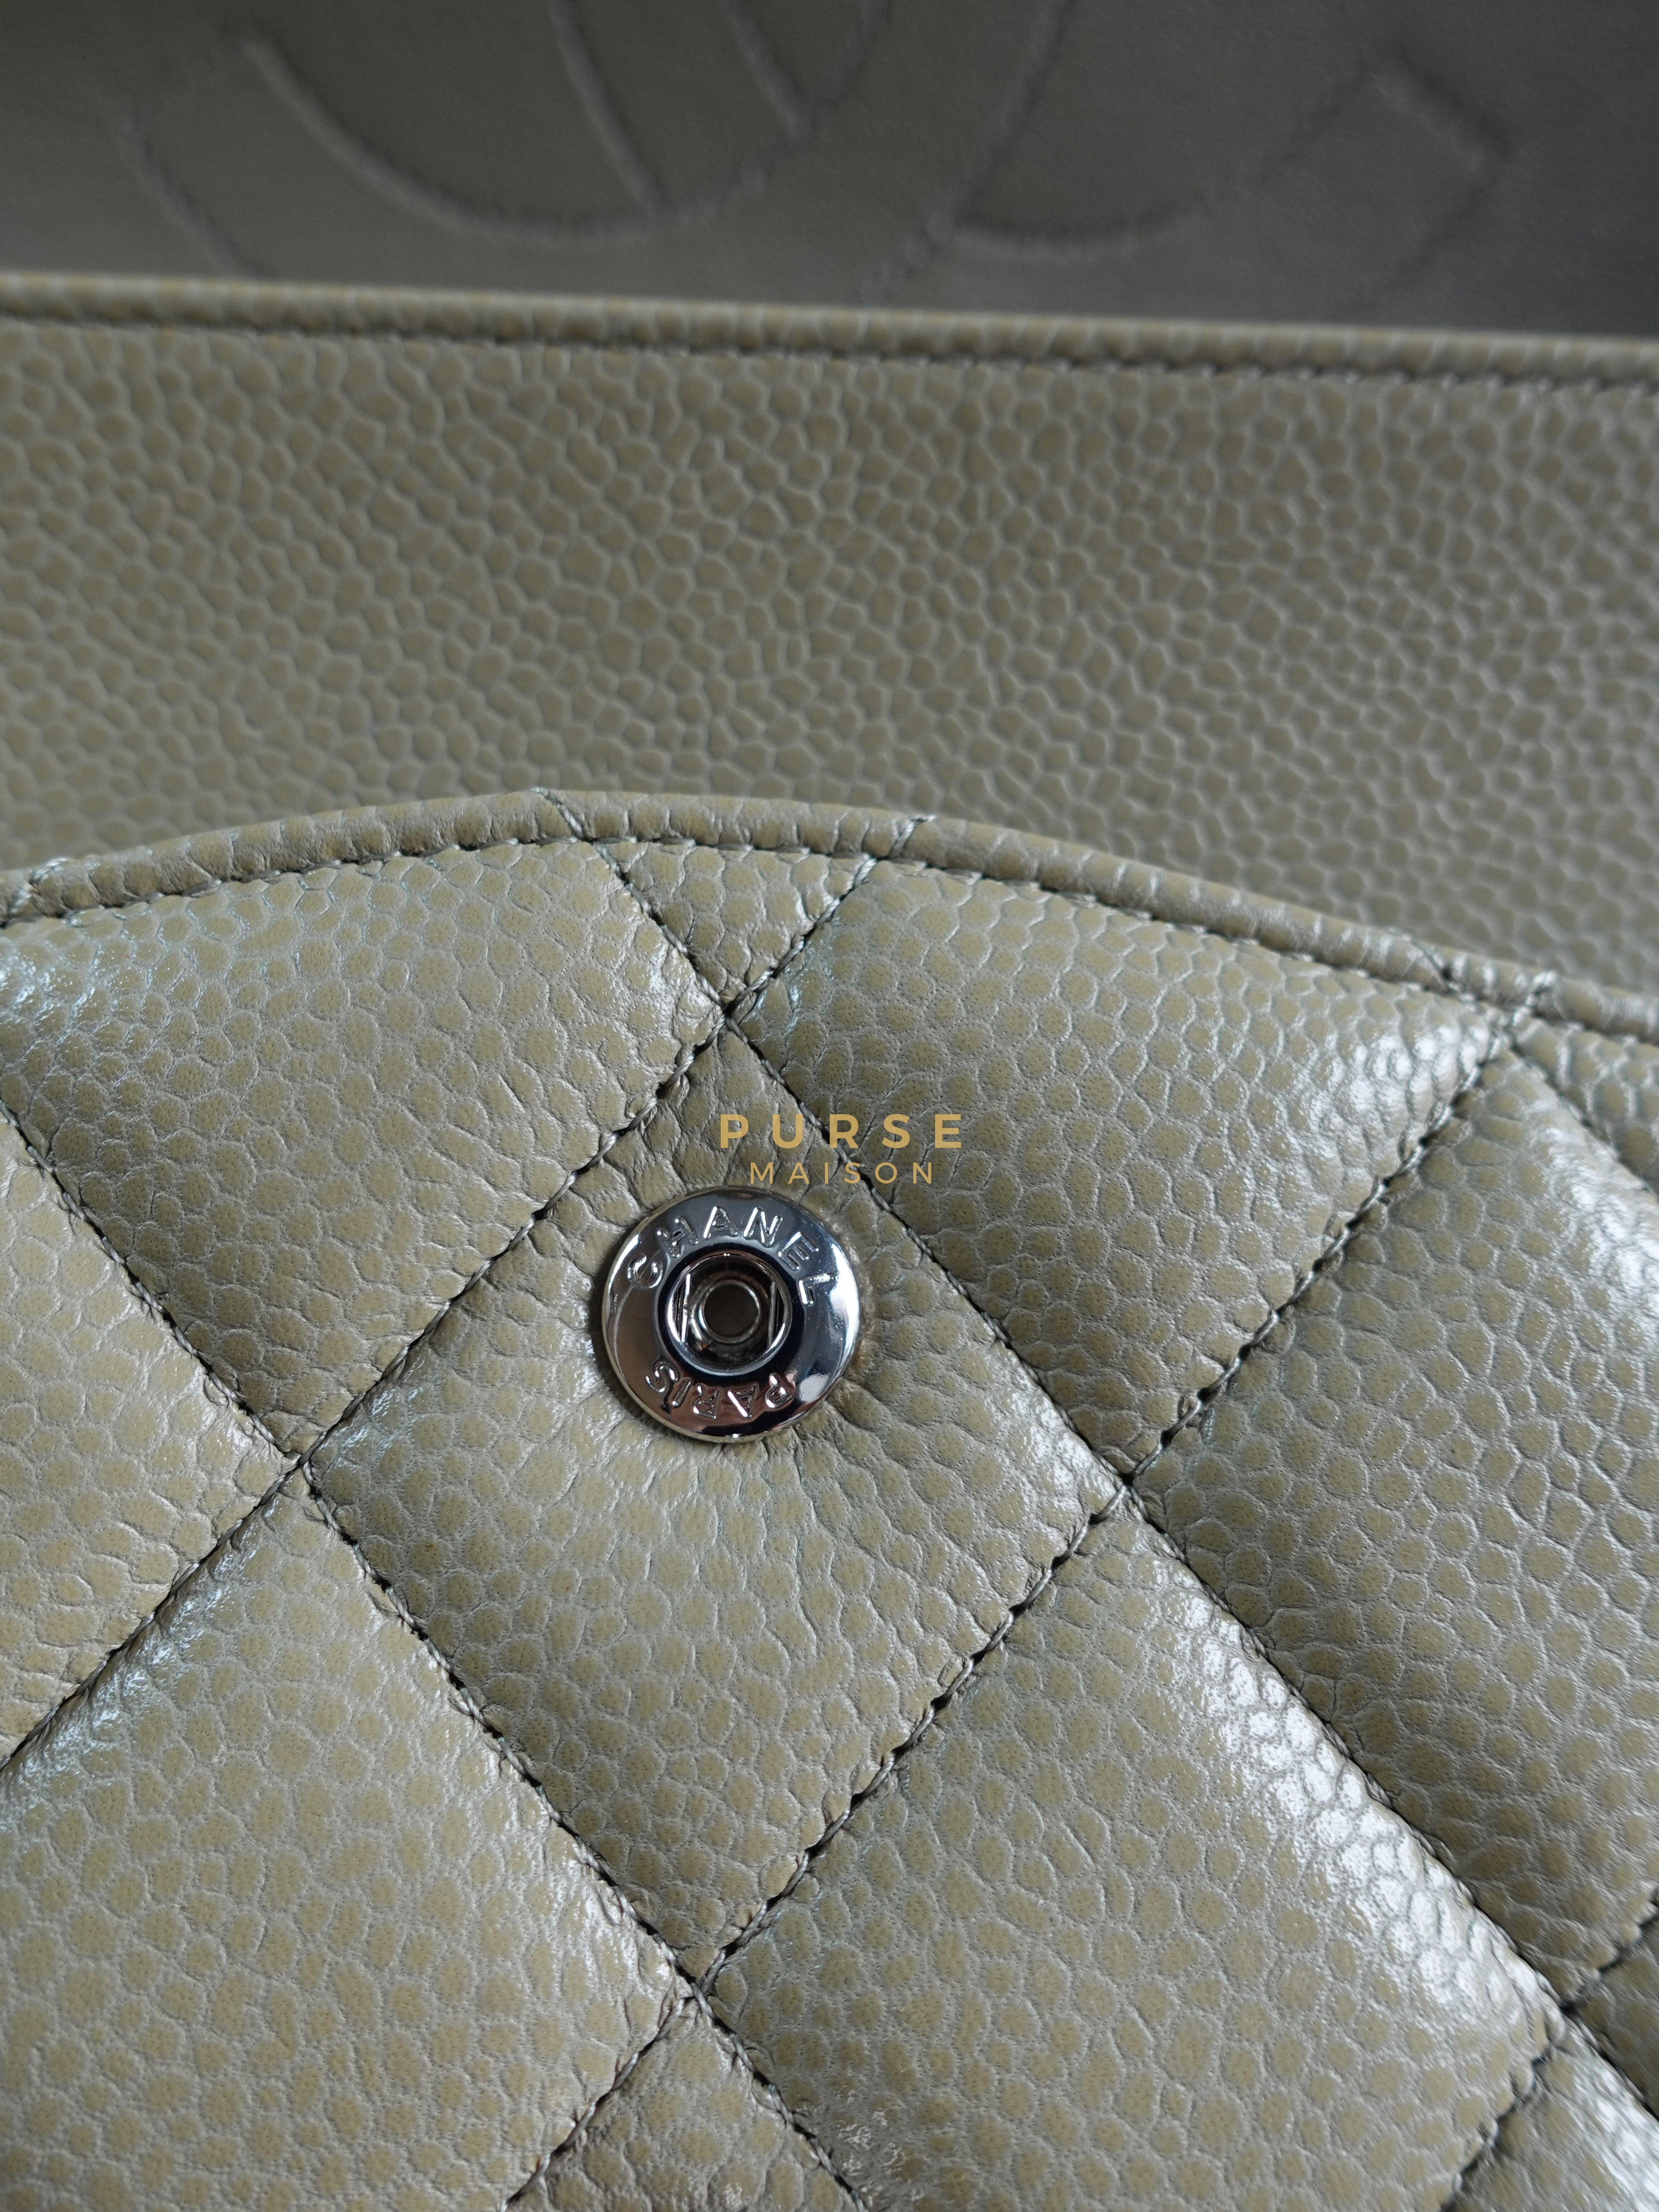 Classic Double Flap Jumbo in Olive Green Caviar Leather & Silver Hardware Series 19 | Purse Maison Luxury Bags Shop